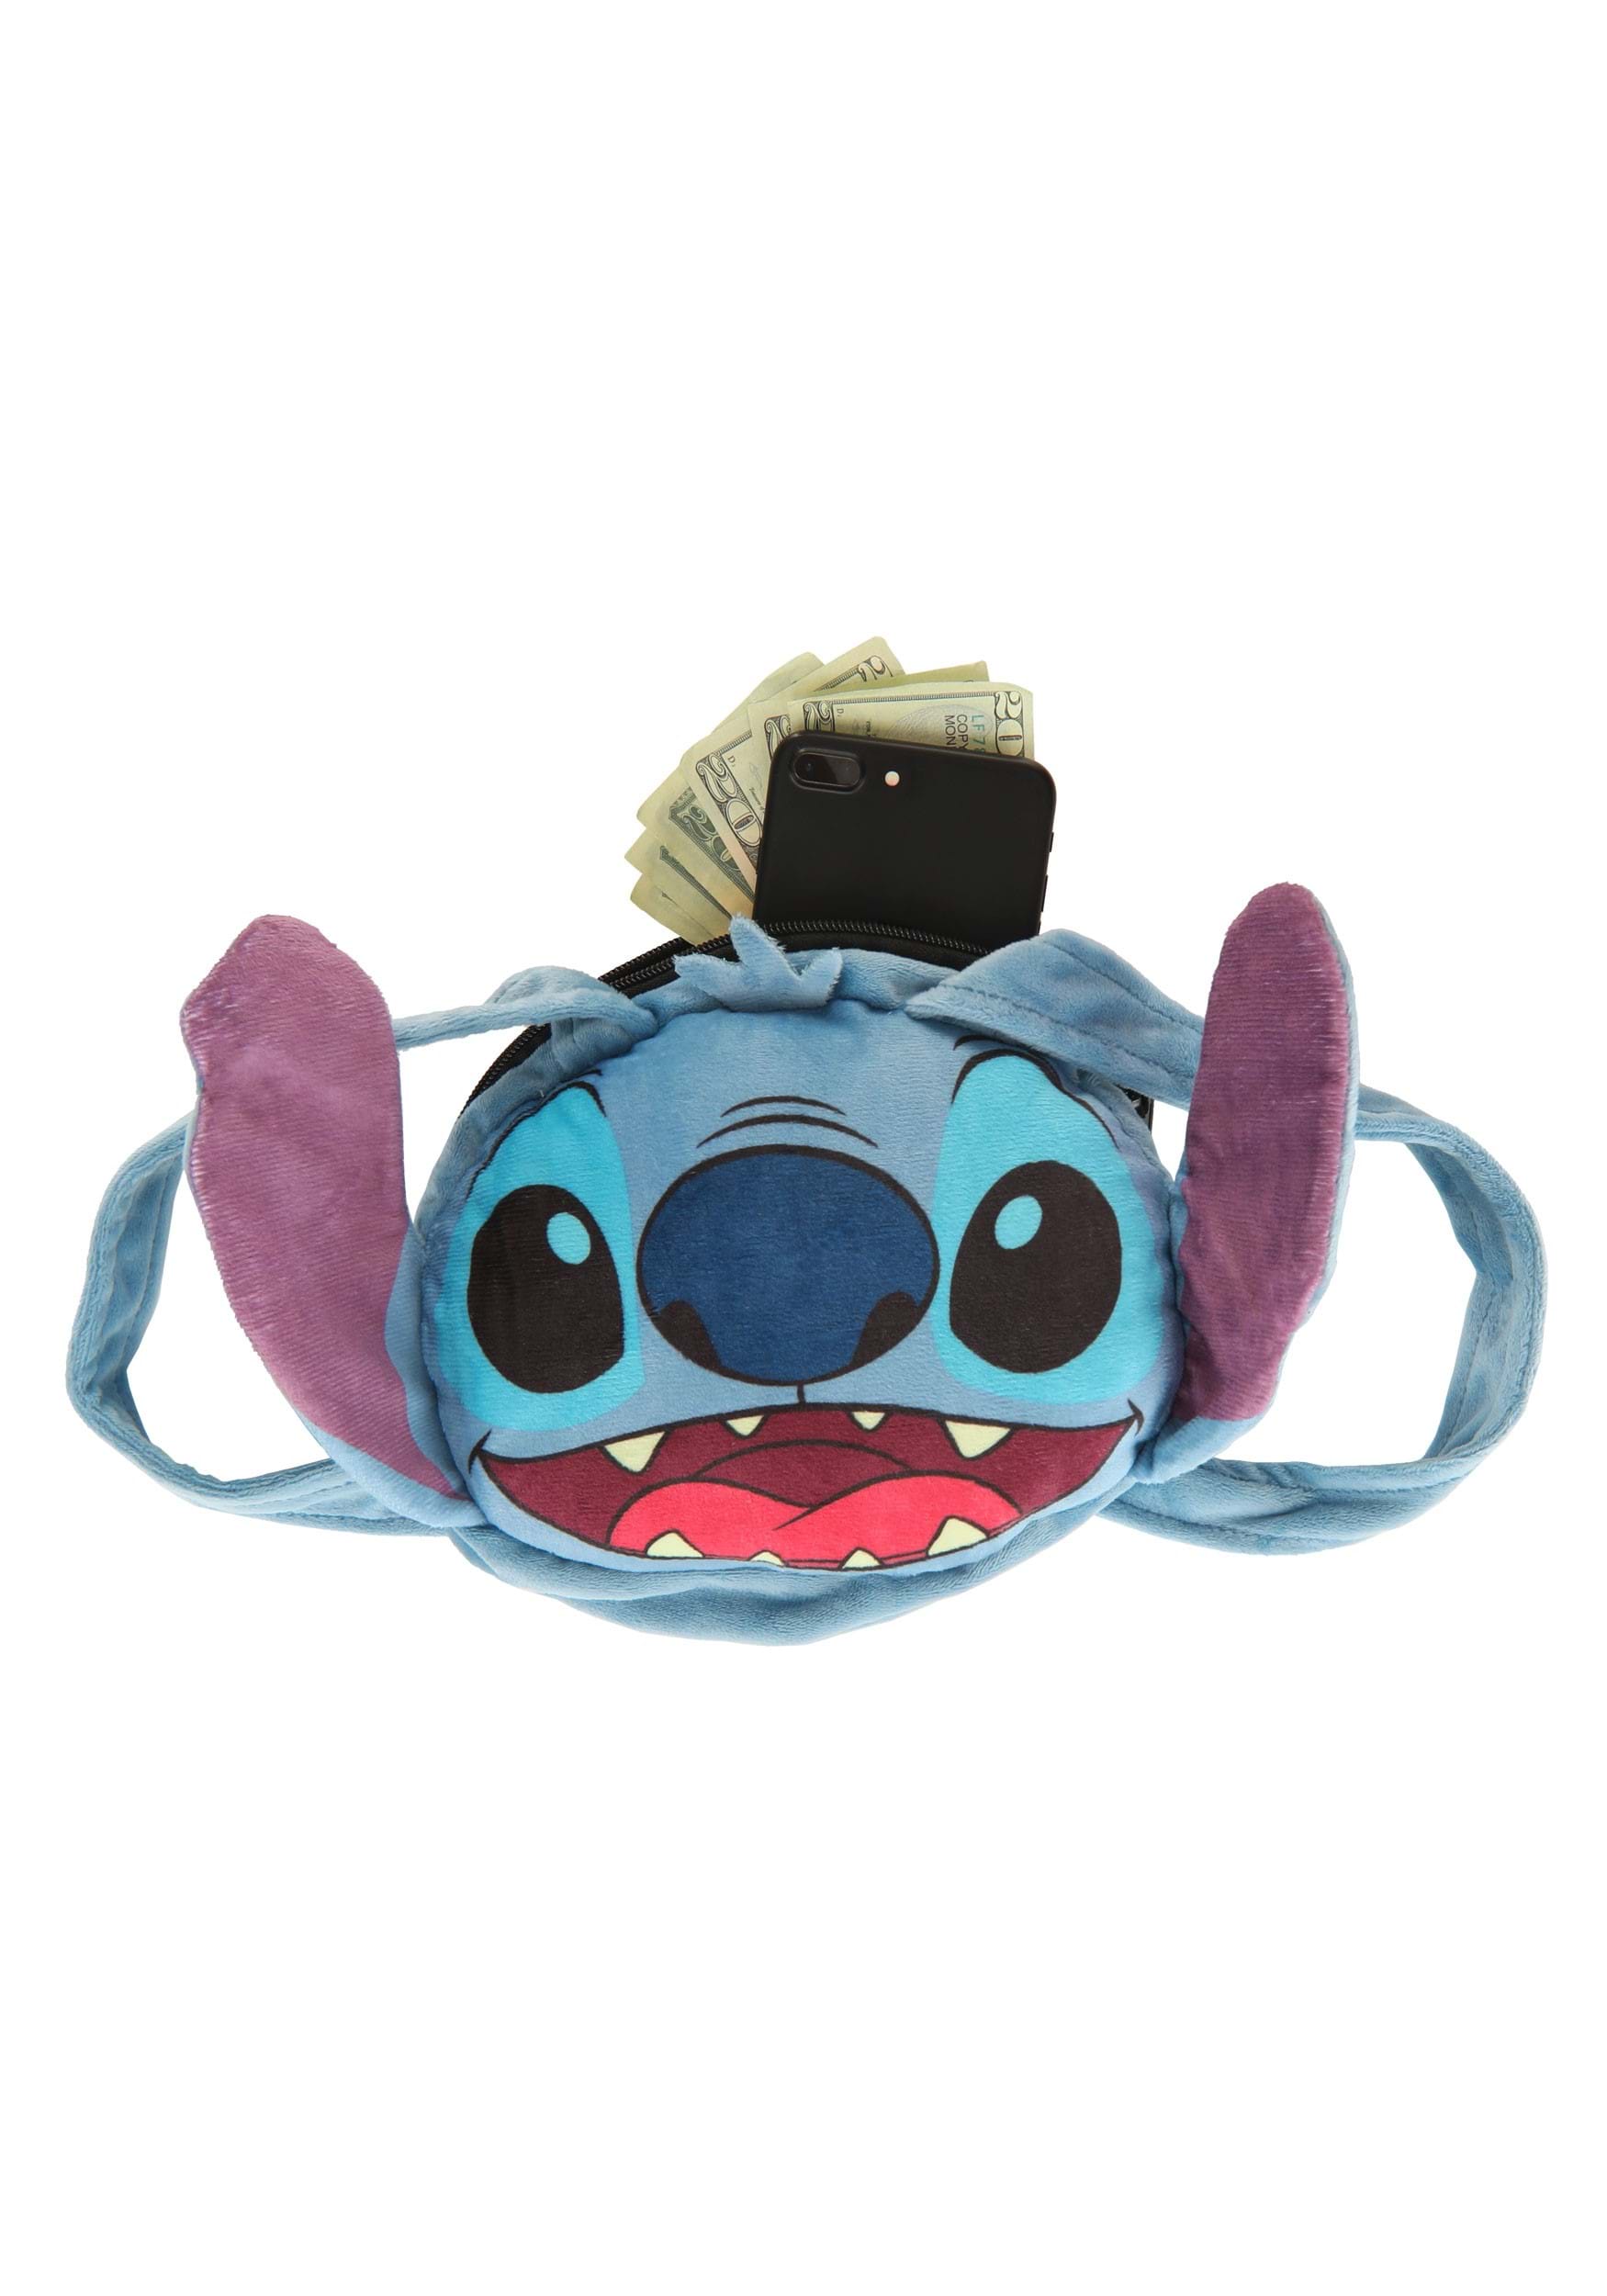 stitch with @purseblog the bag everyone in that video was asking abou, shoulder bags